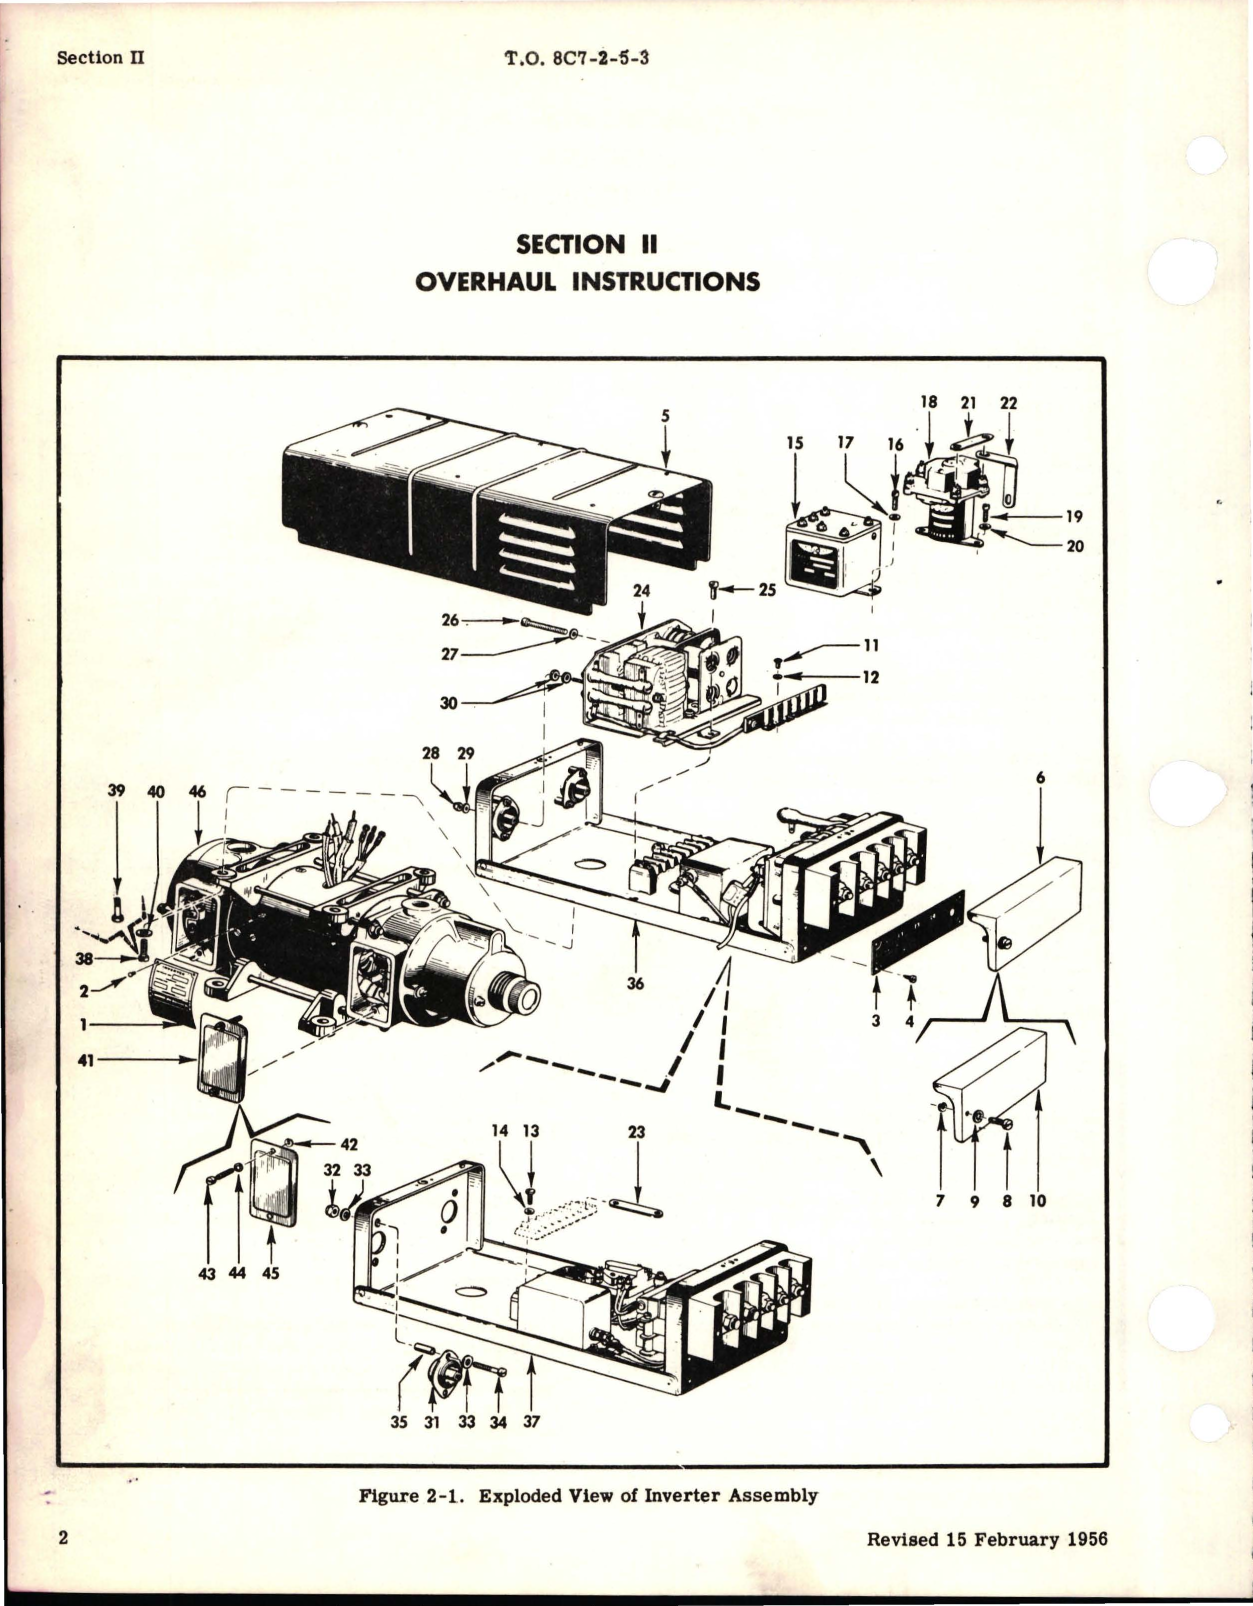 Sample page 6 from AirCorps Library document: Overhaul Manual for Inverter - Models F15-1, F15-2, F15-2M, F16-1, F16-2, F16-4, and F16-4M